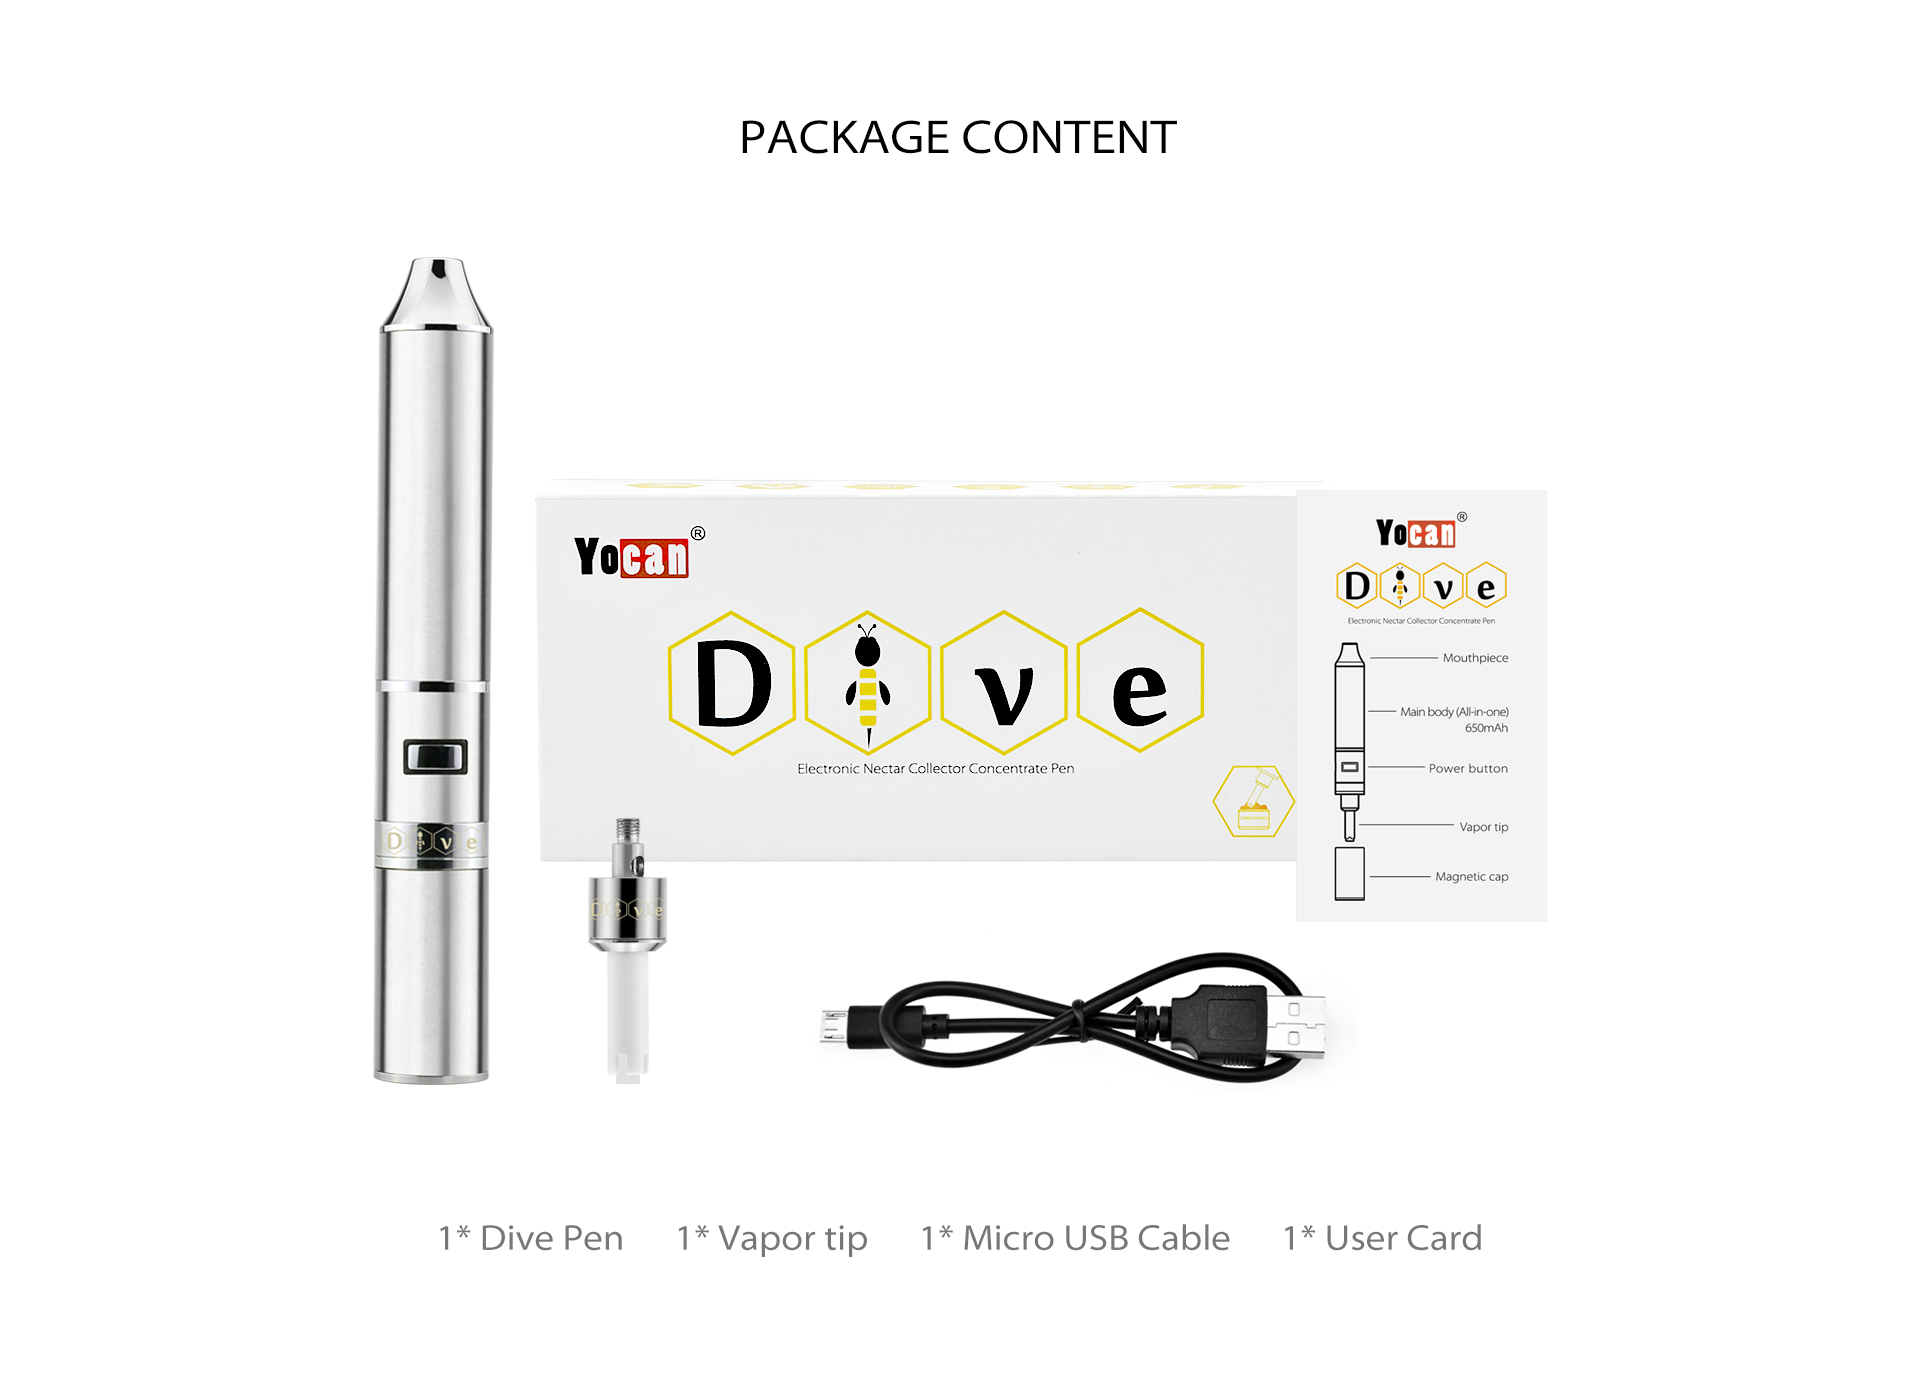 Yocan Dive Electronic Concentrate Pen package content.